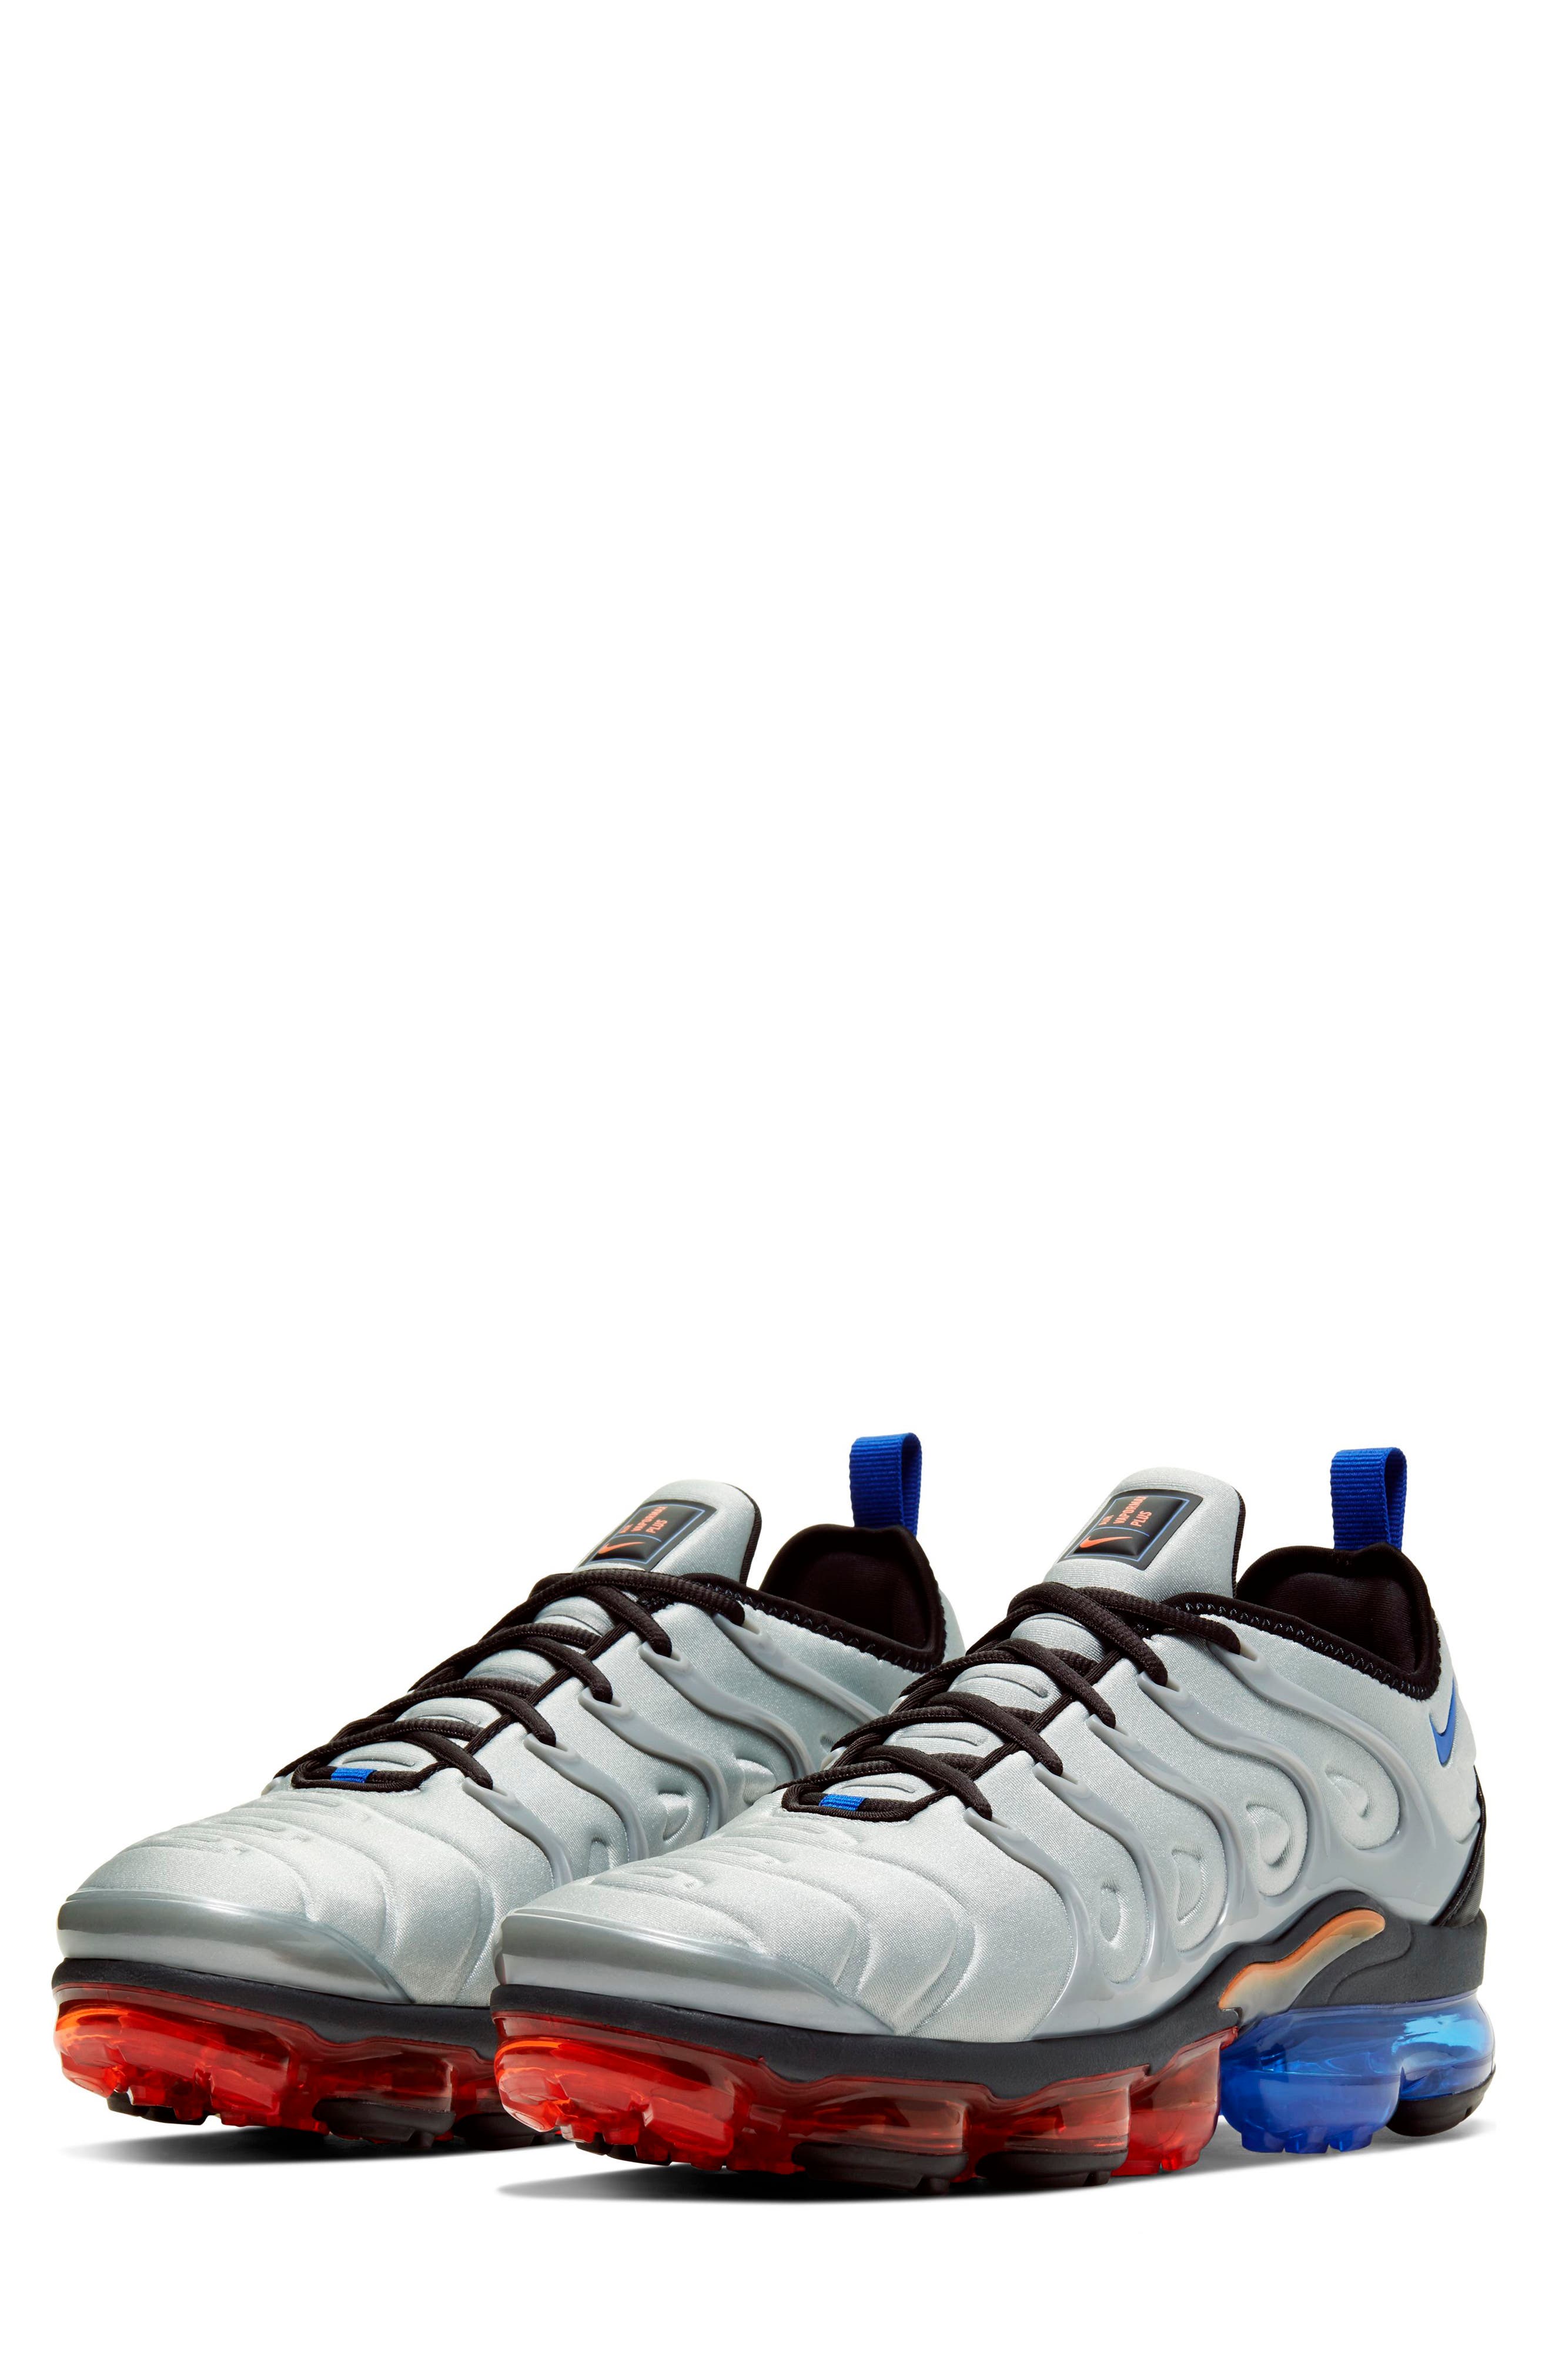 Nike Air Vapormax Plus Work Blue Cool Gray Diffused